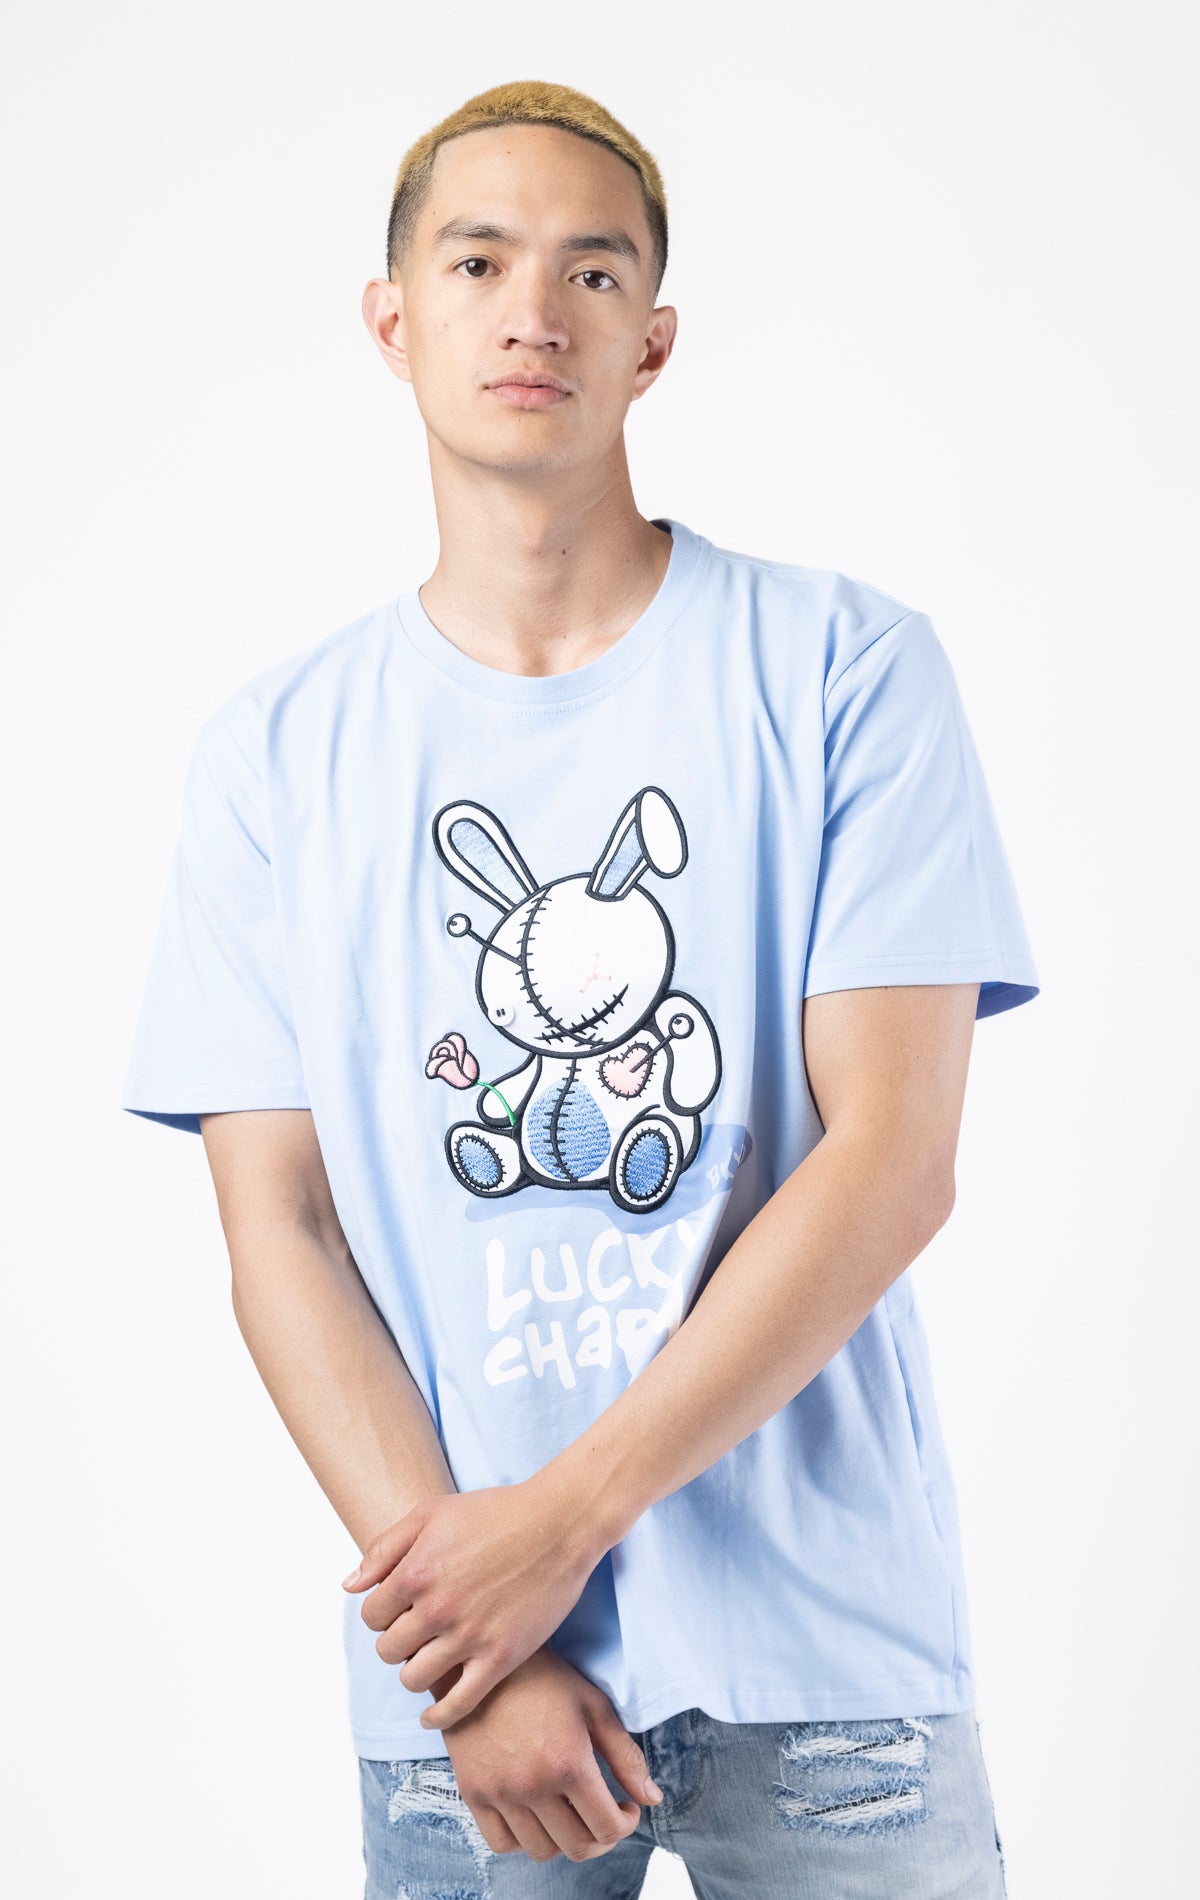 Uni blue Crewneck, short-sleeve BKYS Lucky Charm t-shirt with bunny graphic on front